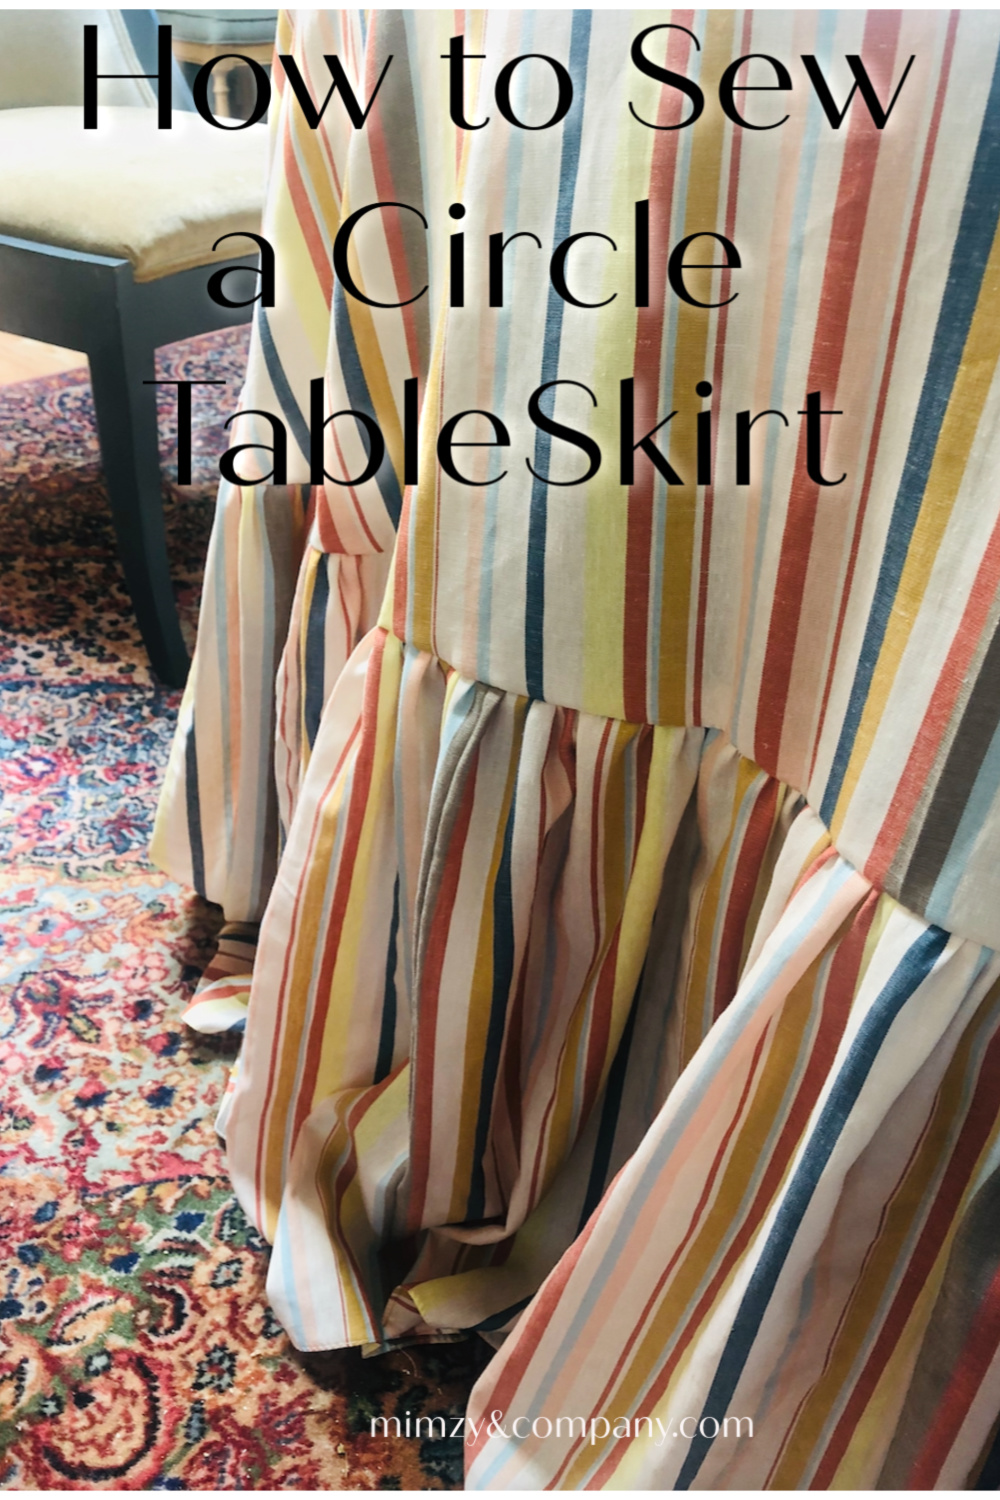 How To Sew A Circle Floor Length Table, How To Make A Circle Table Skirt